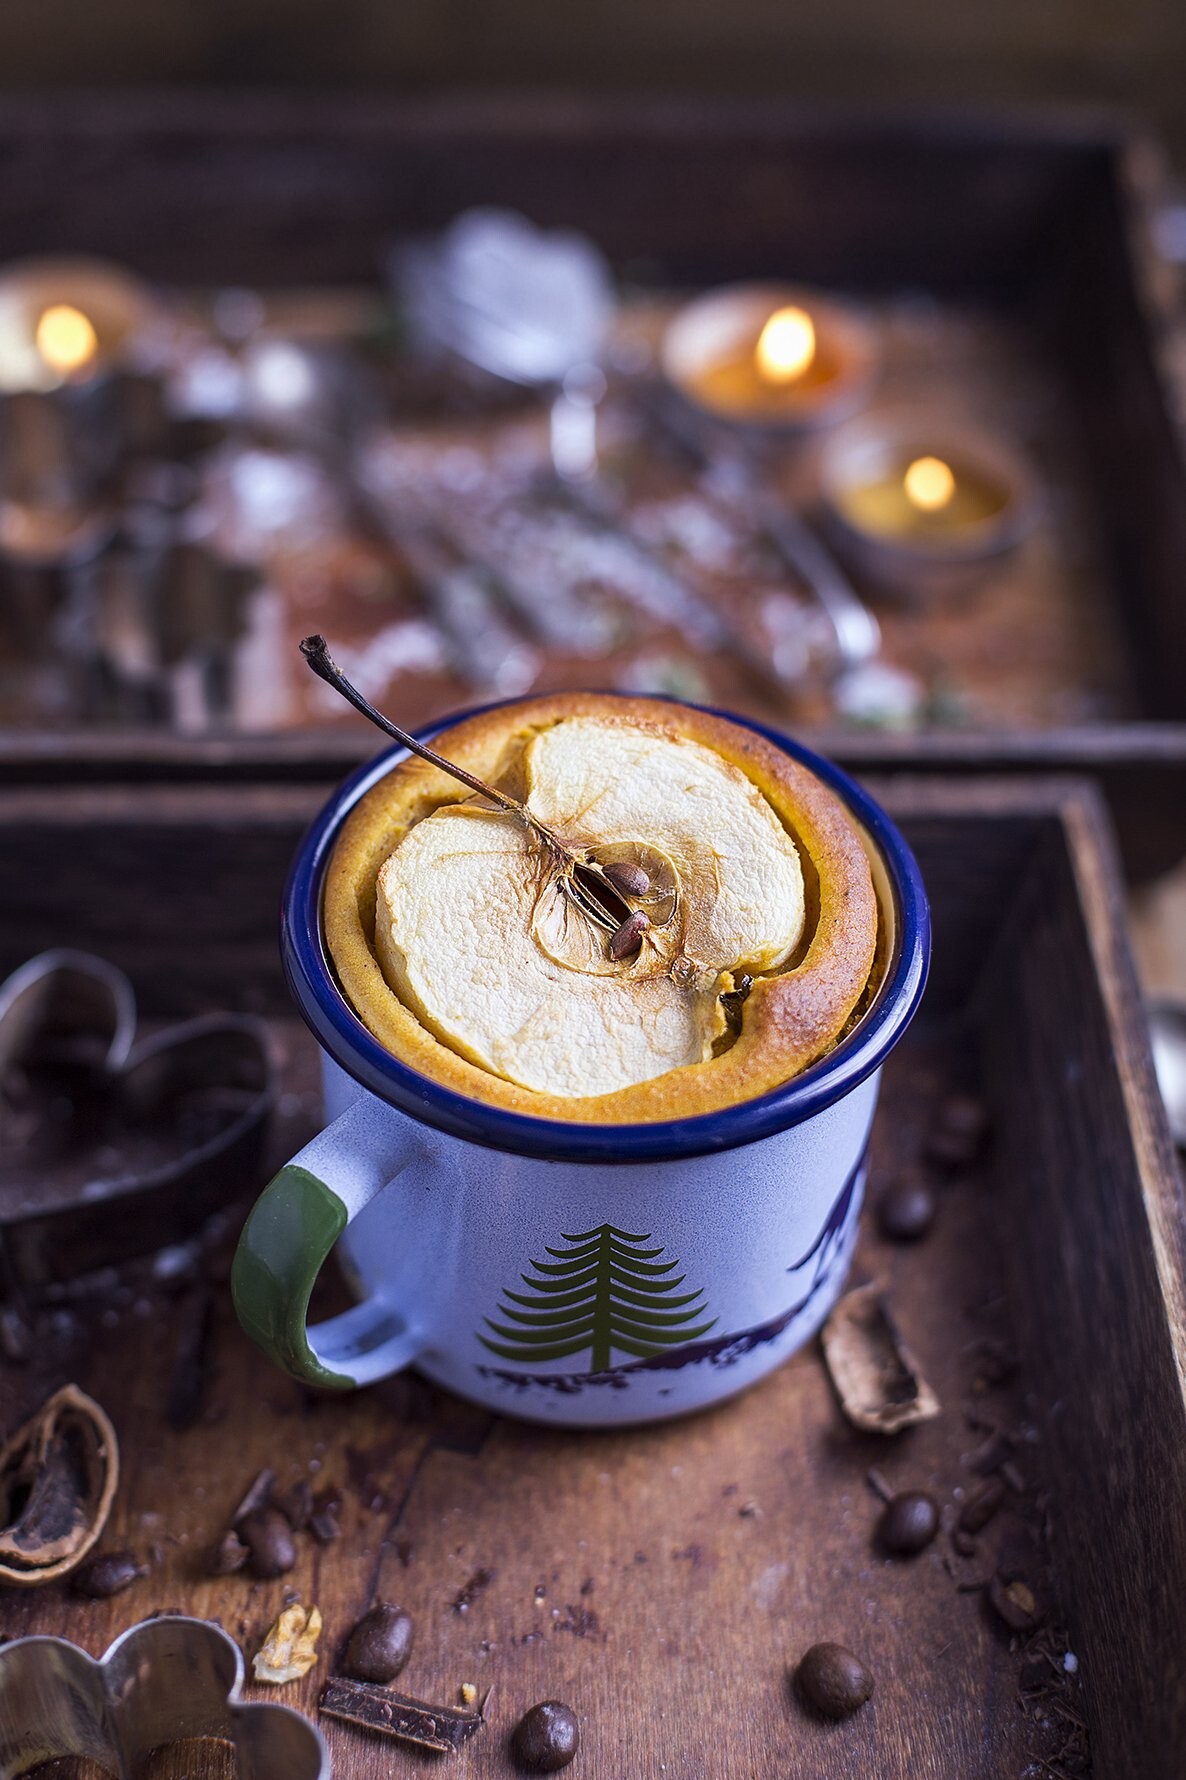 The picture was taken for Emalco Enamelware Company and presents an Apple And Pumpkin Pie baked in an enamel mug. The idea was to present other ways of using enamel mugs and what better way to use them if not in baking? :)